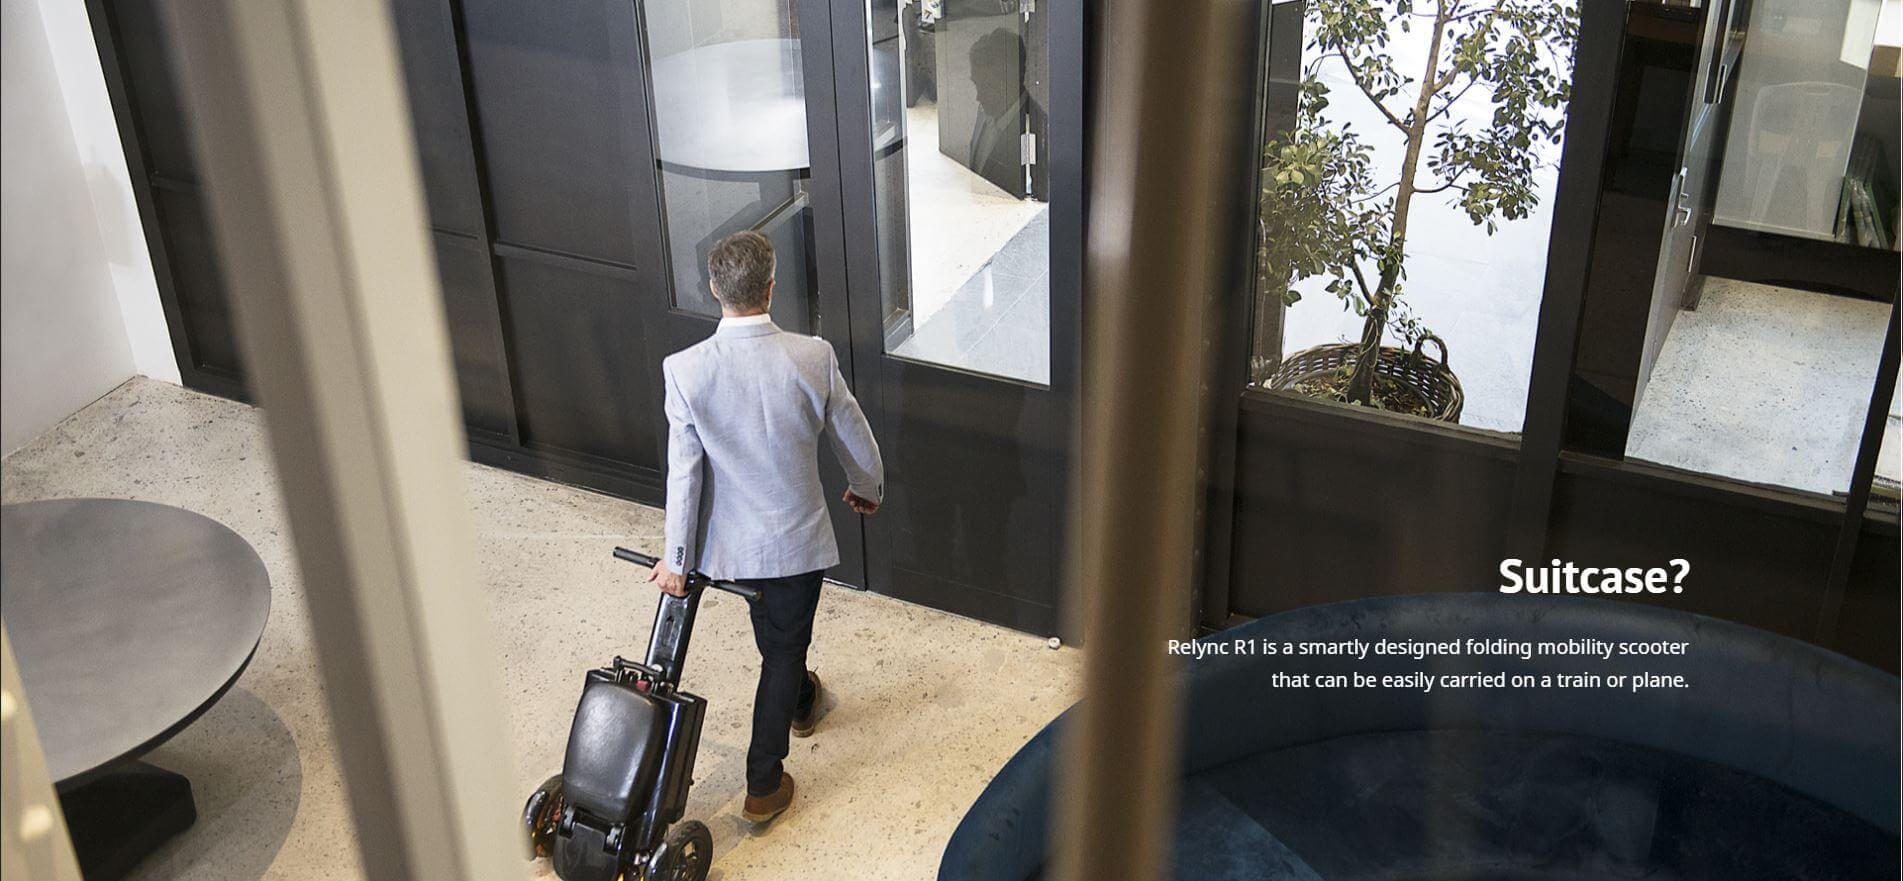 MOBOT RELYNC R1 mobility scooter suitcase